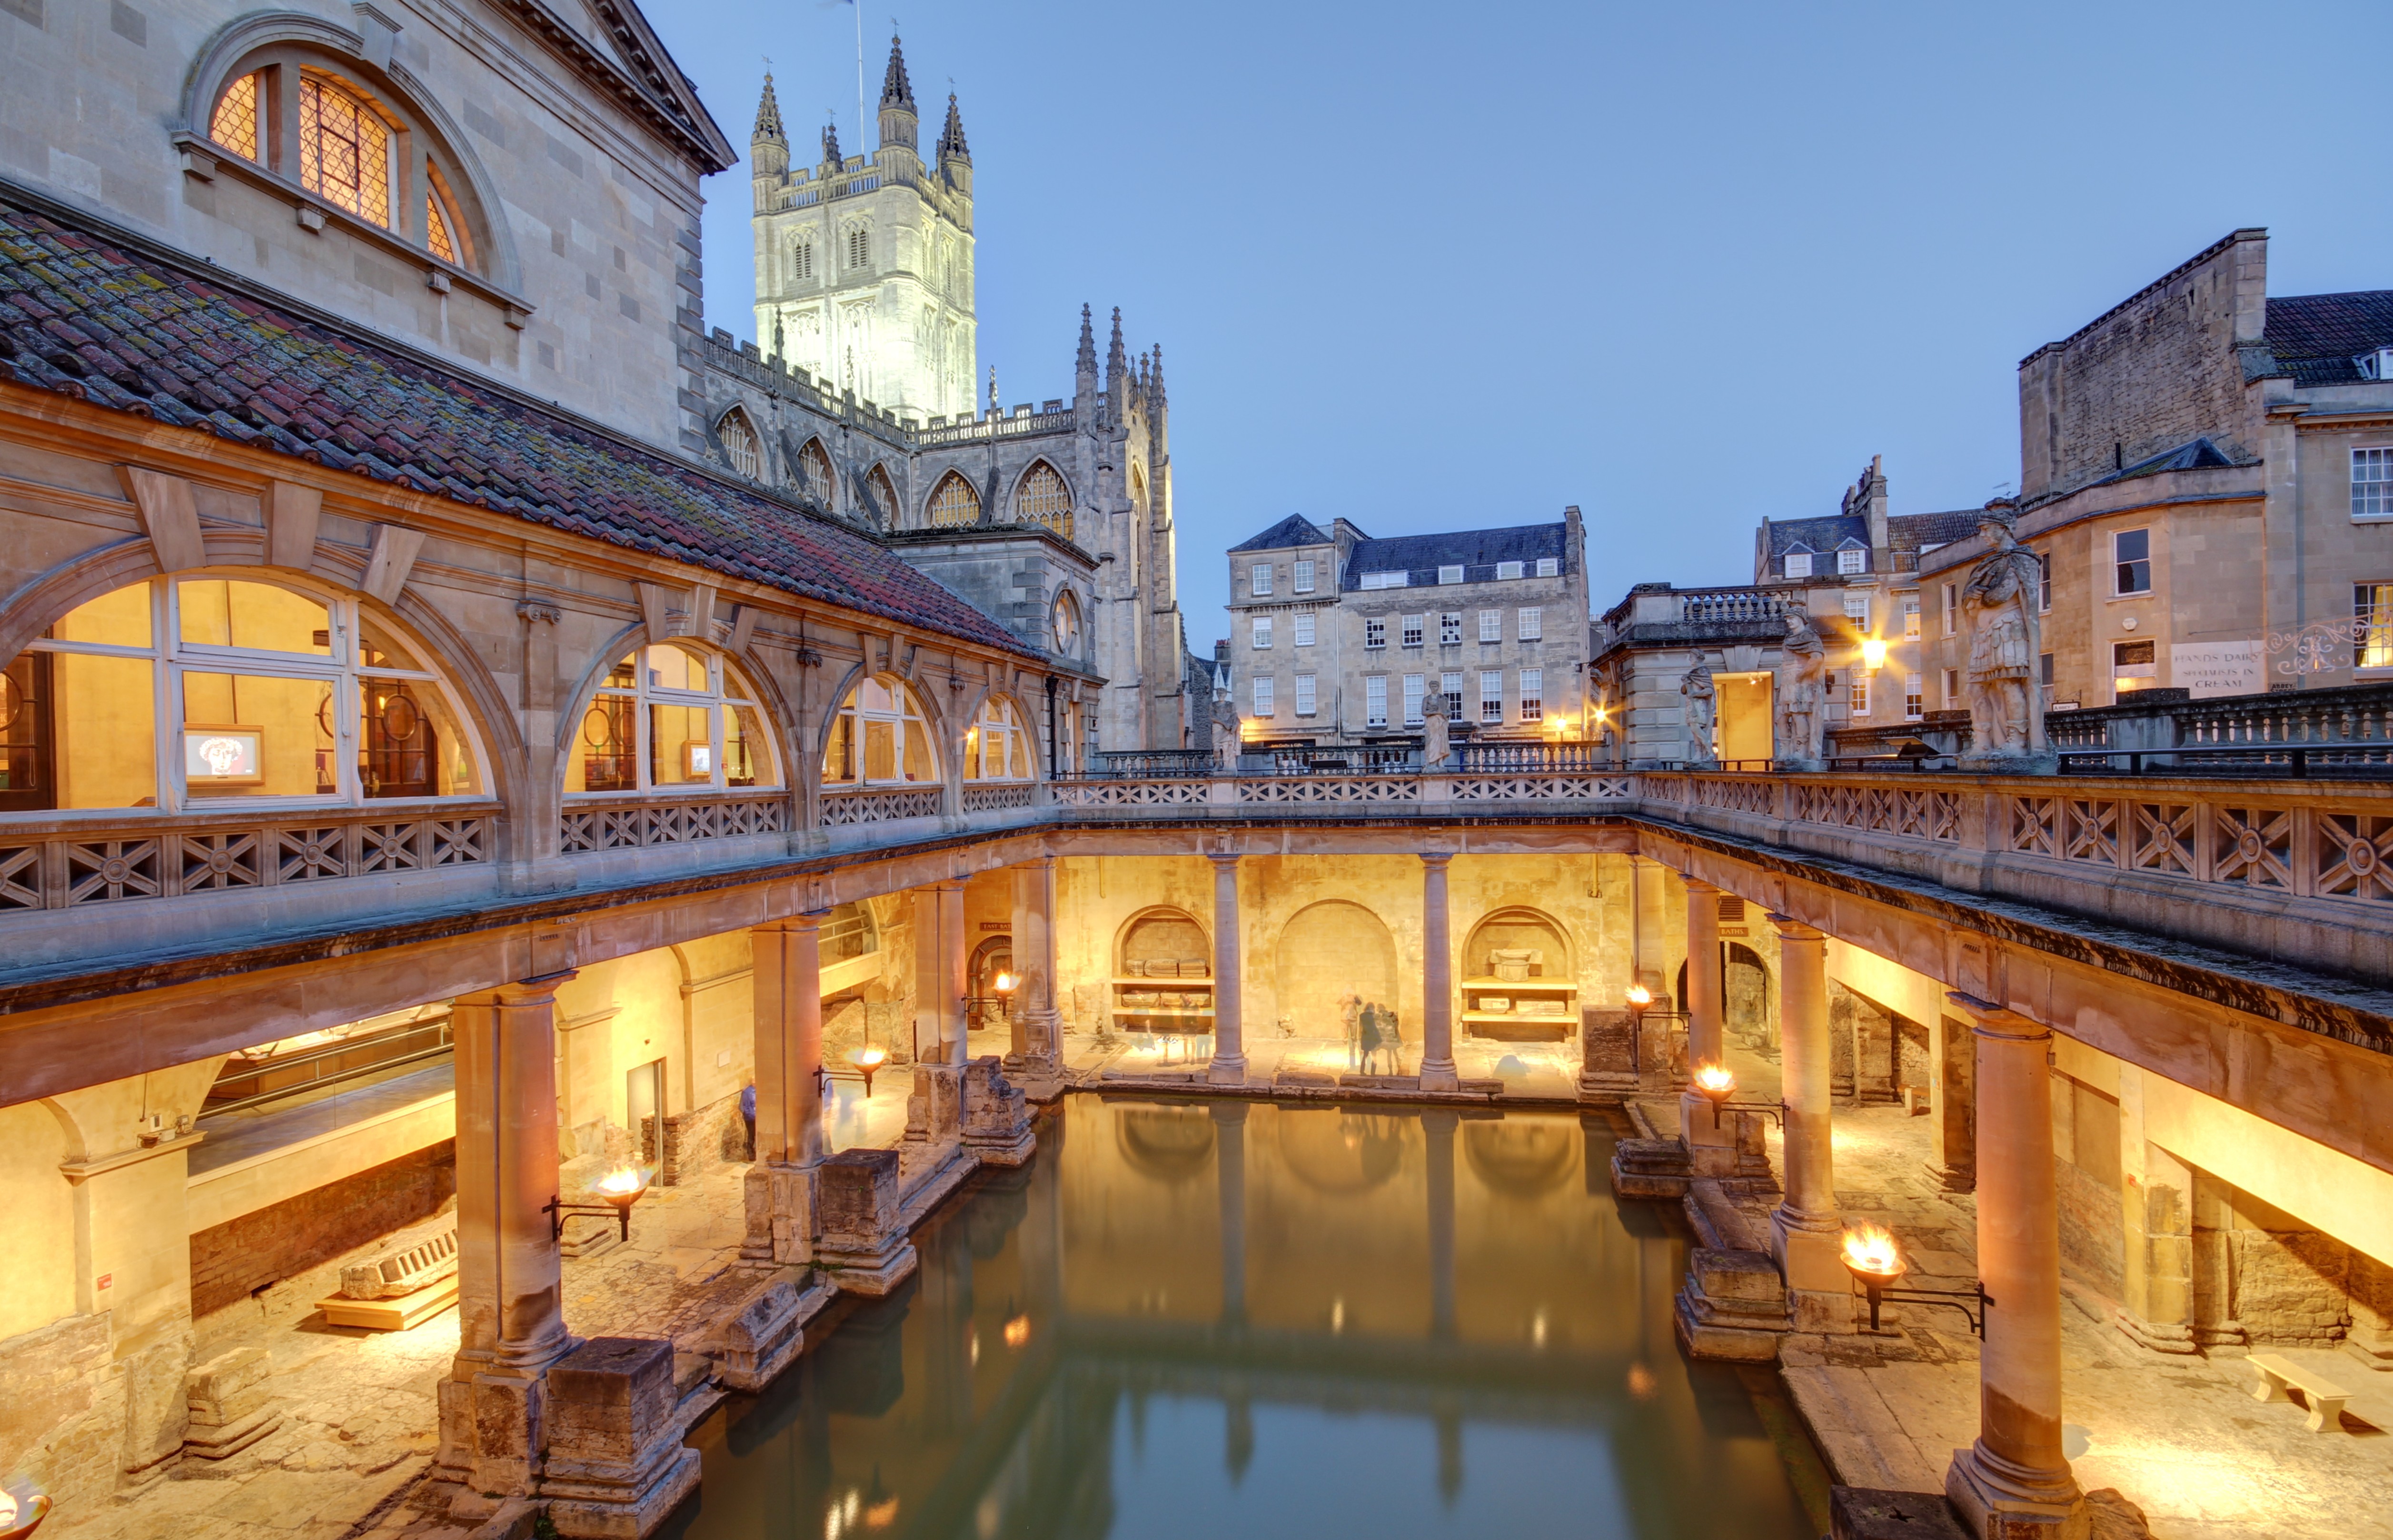 Old roman baths at Bath England - accessible museum for staycation breaks